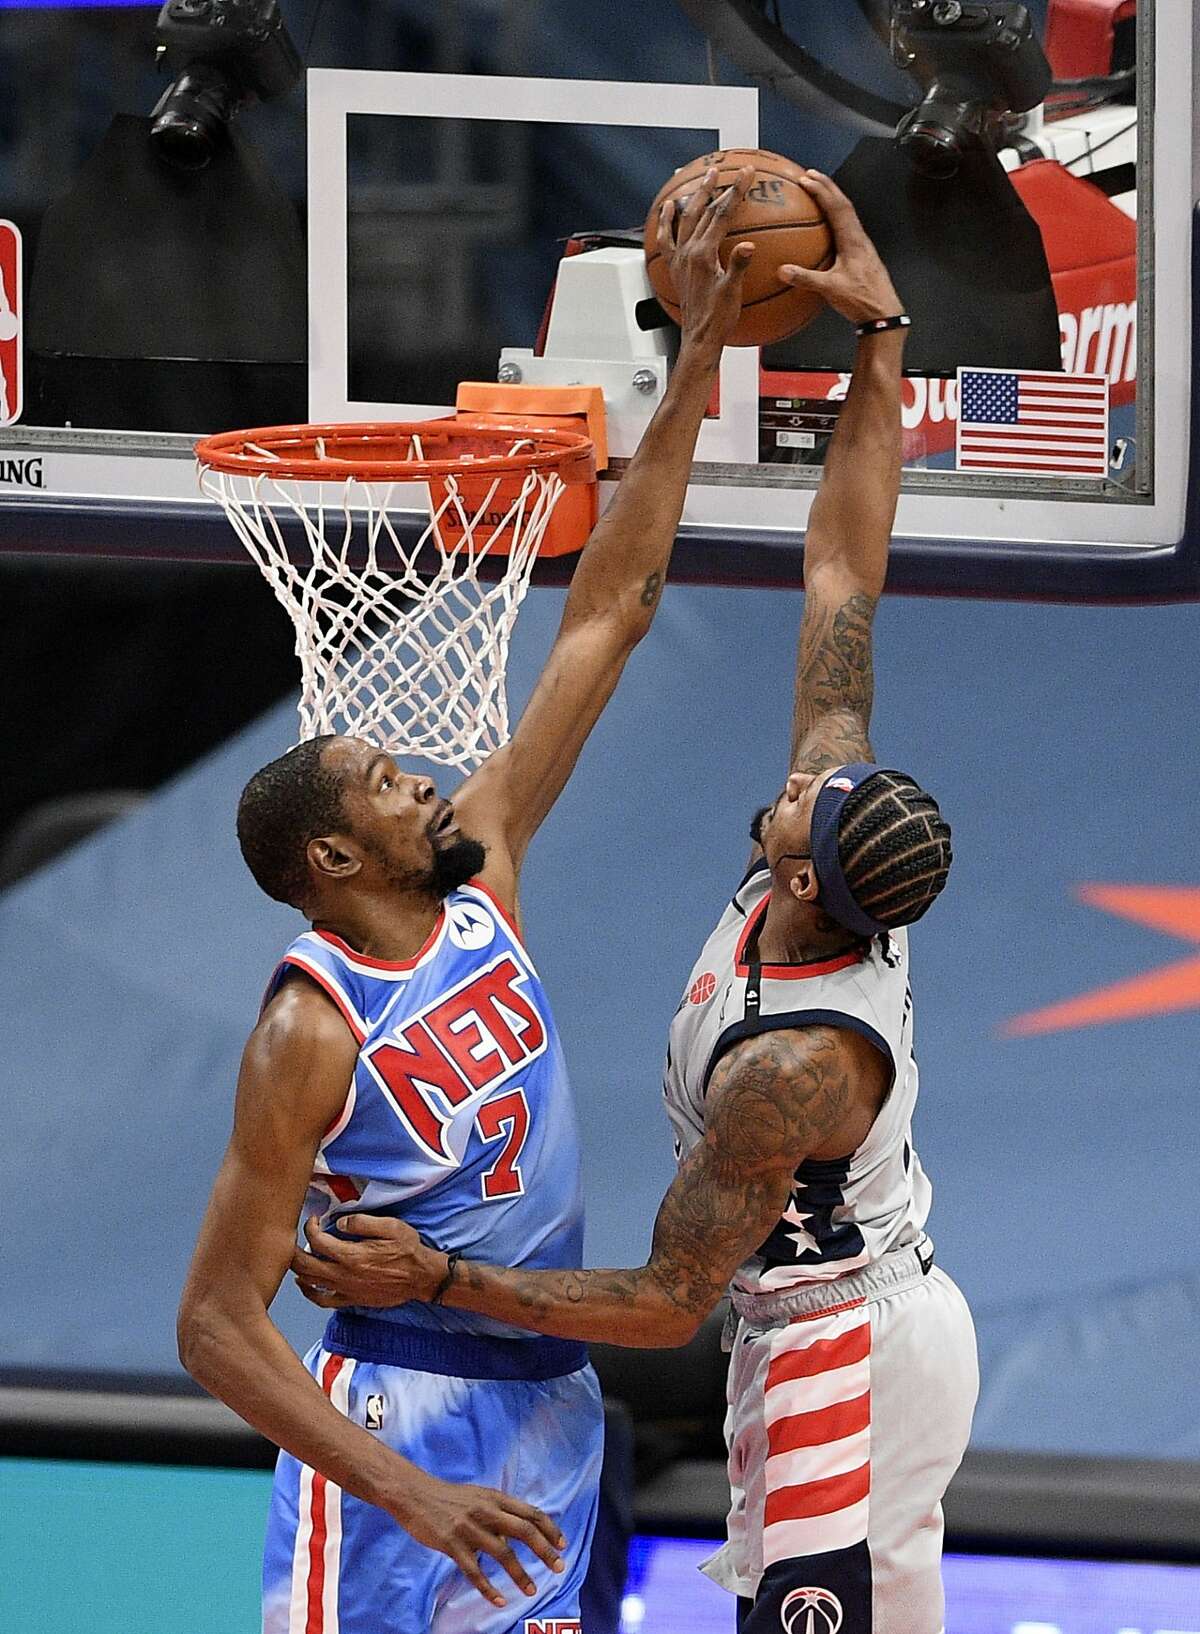 Washington guard Bradley Beal goes to the basket as Brooklyn forward Kevin Durant defends. Each scored 37 points.